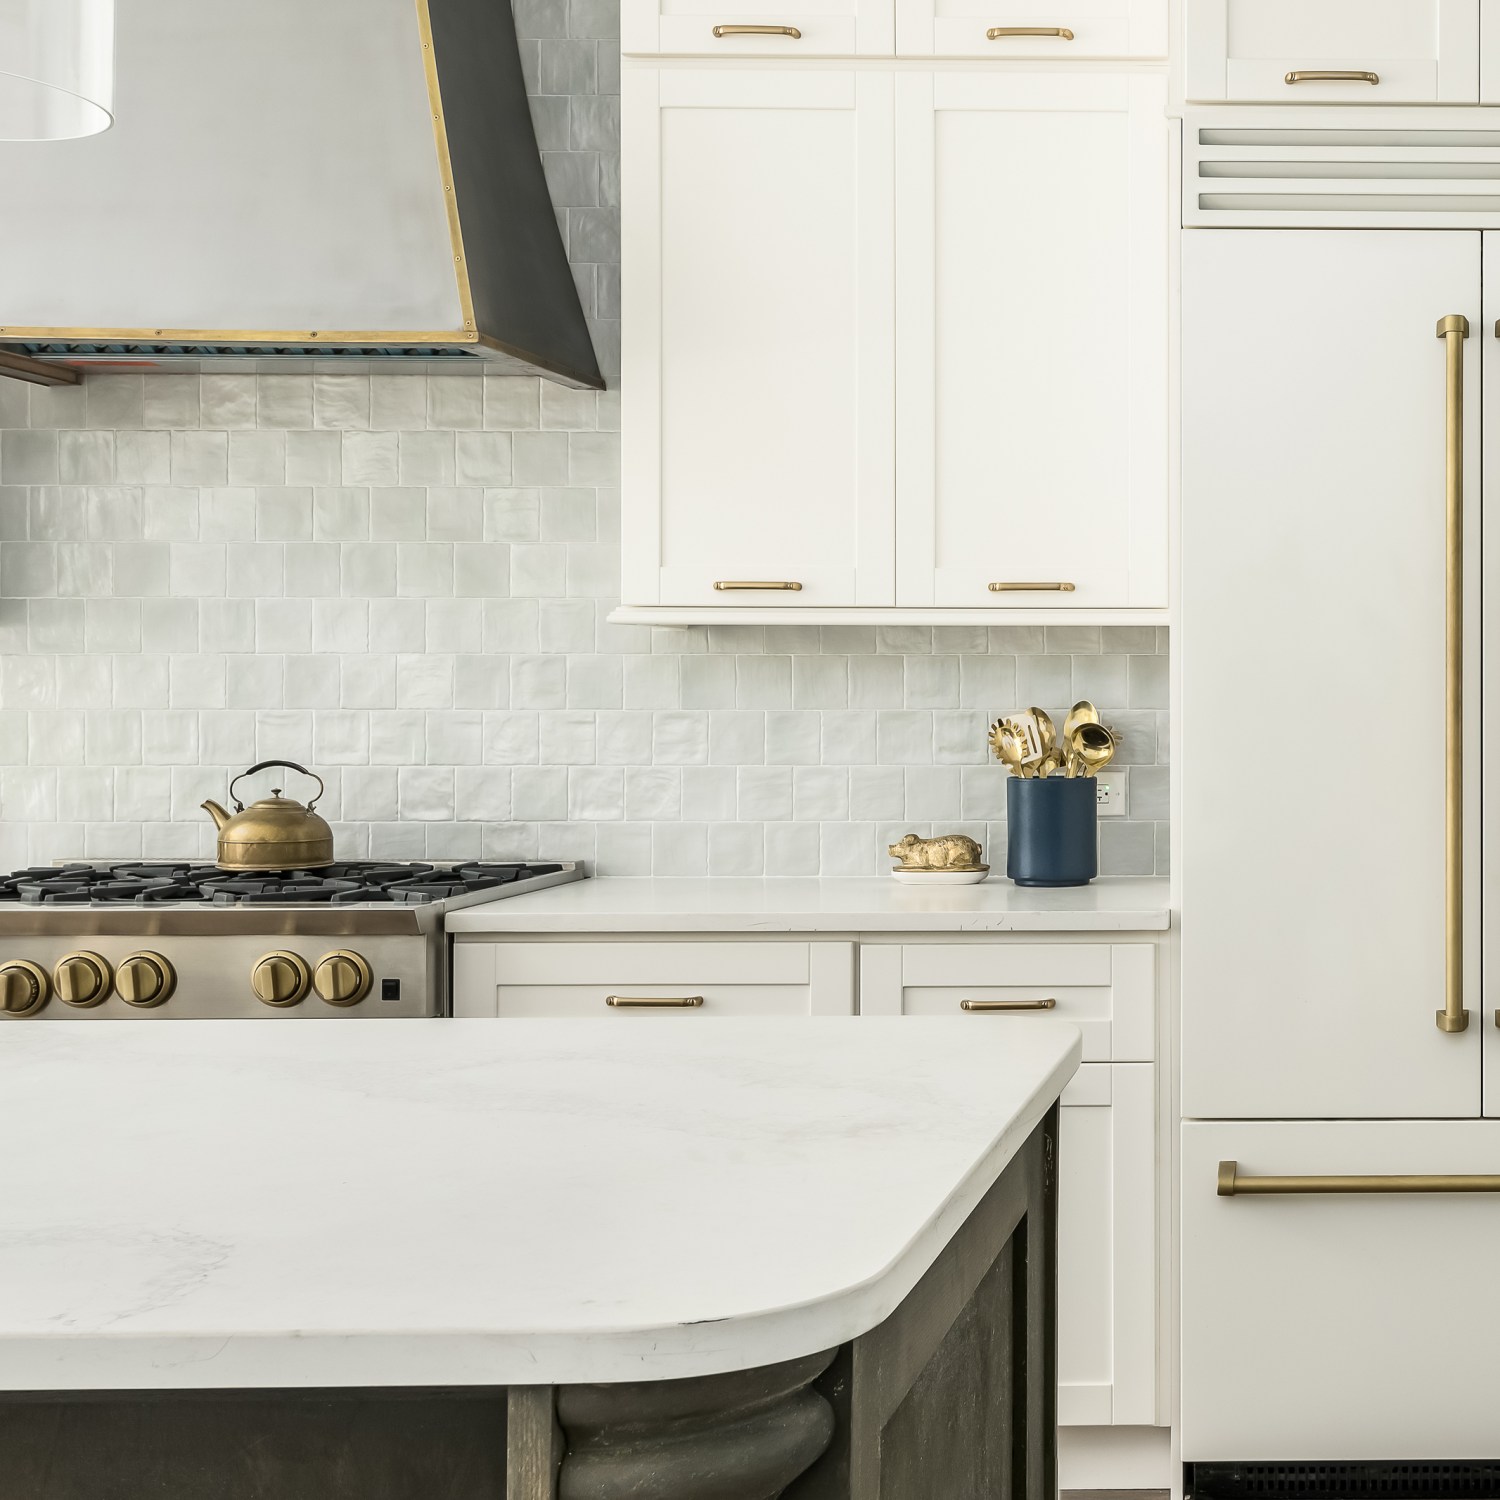 Elegant kitchen with a timeless white design, this kitchen features a white matte refrigerator, white cabinets, and two toned kitchen island with a gray tile backsplash.